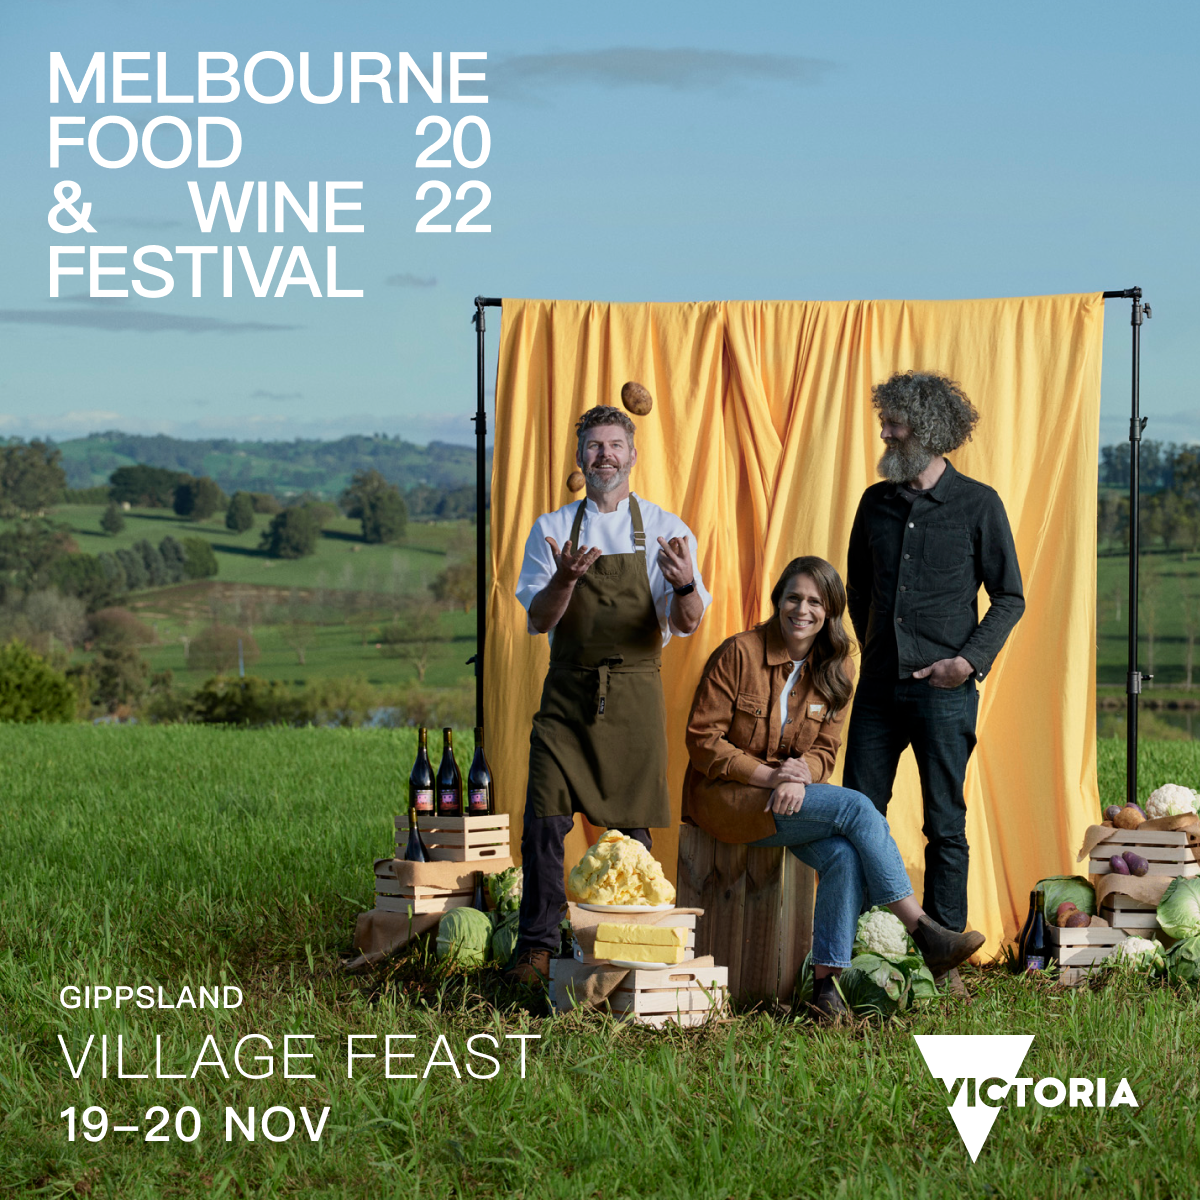 A weekend of food, fun and wonder in Gippsland.